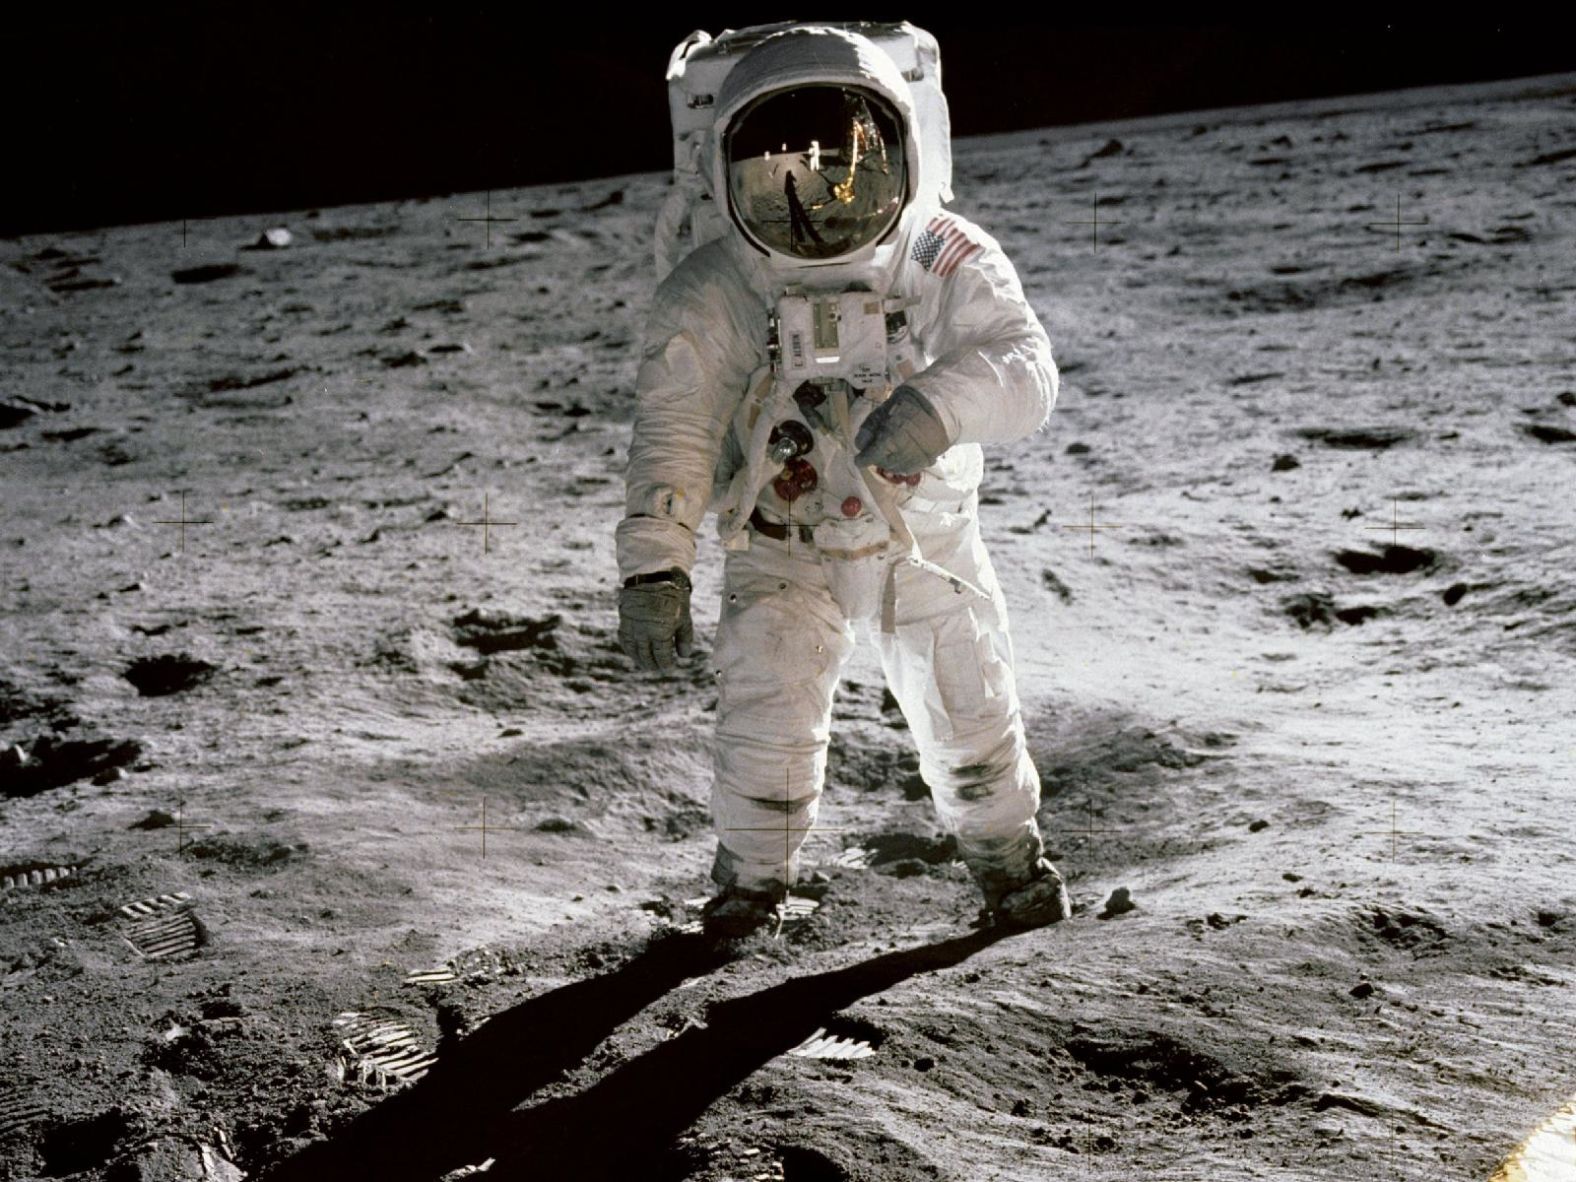 Aldrin walks on the surface of the moon. He and Armstrong spent a little over two hours collecting rock samples and data near the moon's Sea of Tranquility region. They also left behind a plaque signed by all three crew members and President Richard Nixon. The plaque reads: "Here men from the planet Earth first set foot upon the moon, July 1969 A.D. We came in peace for all mankind."